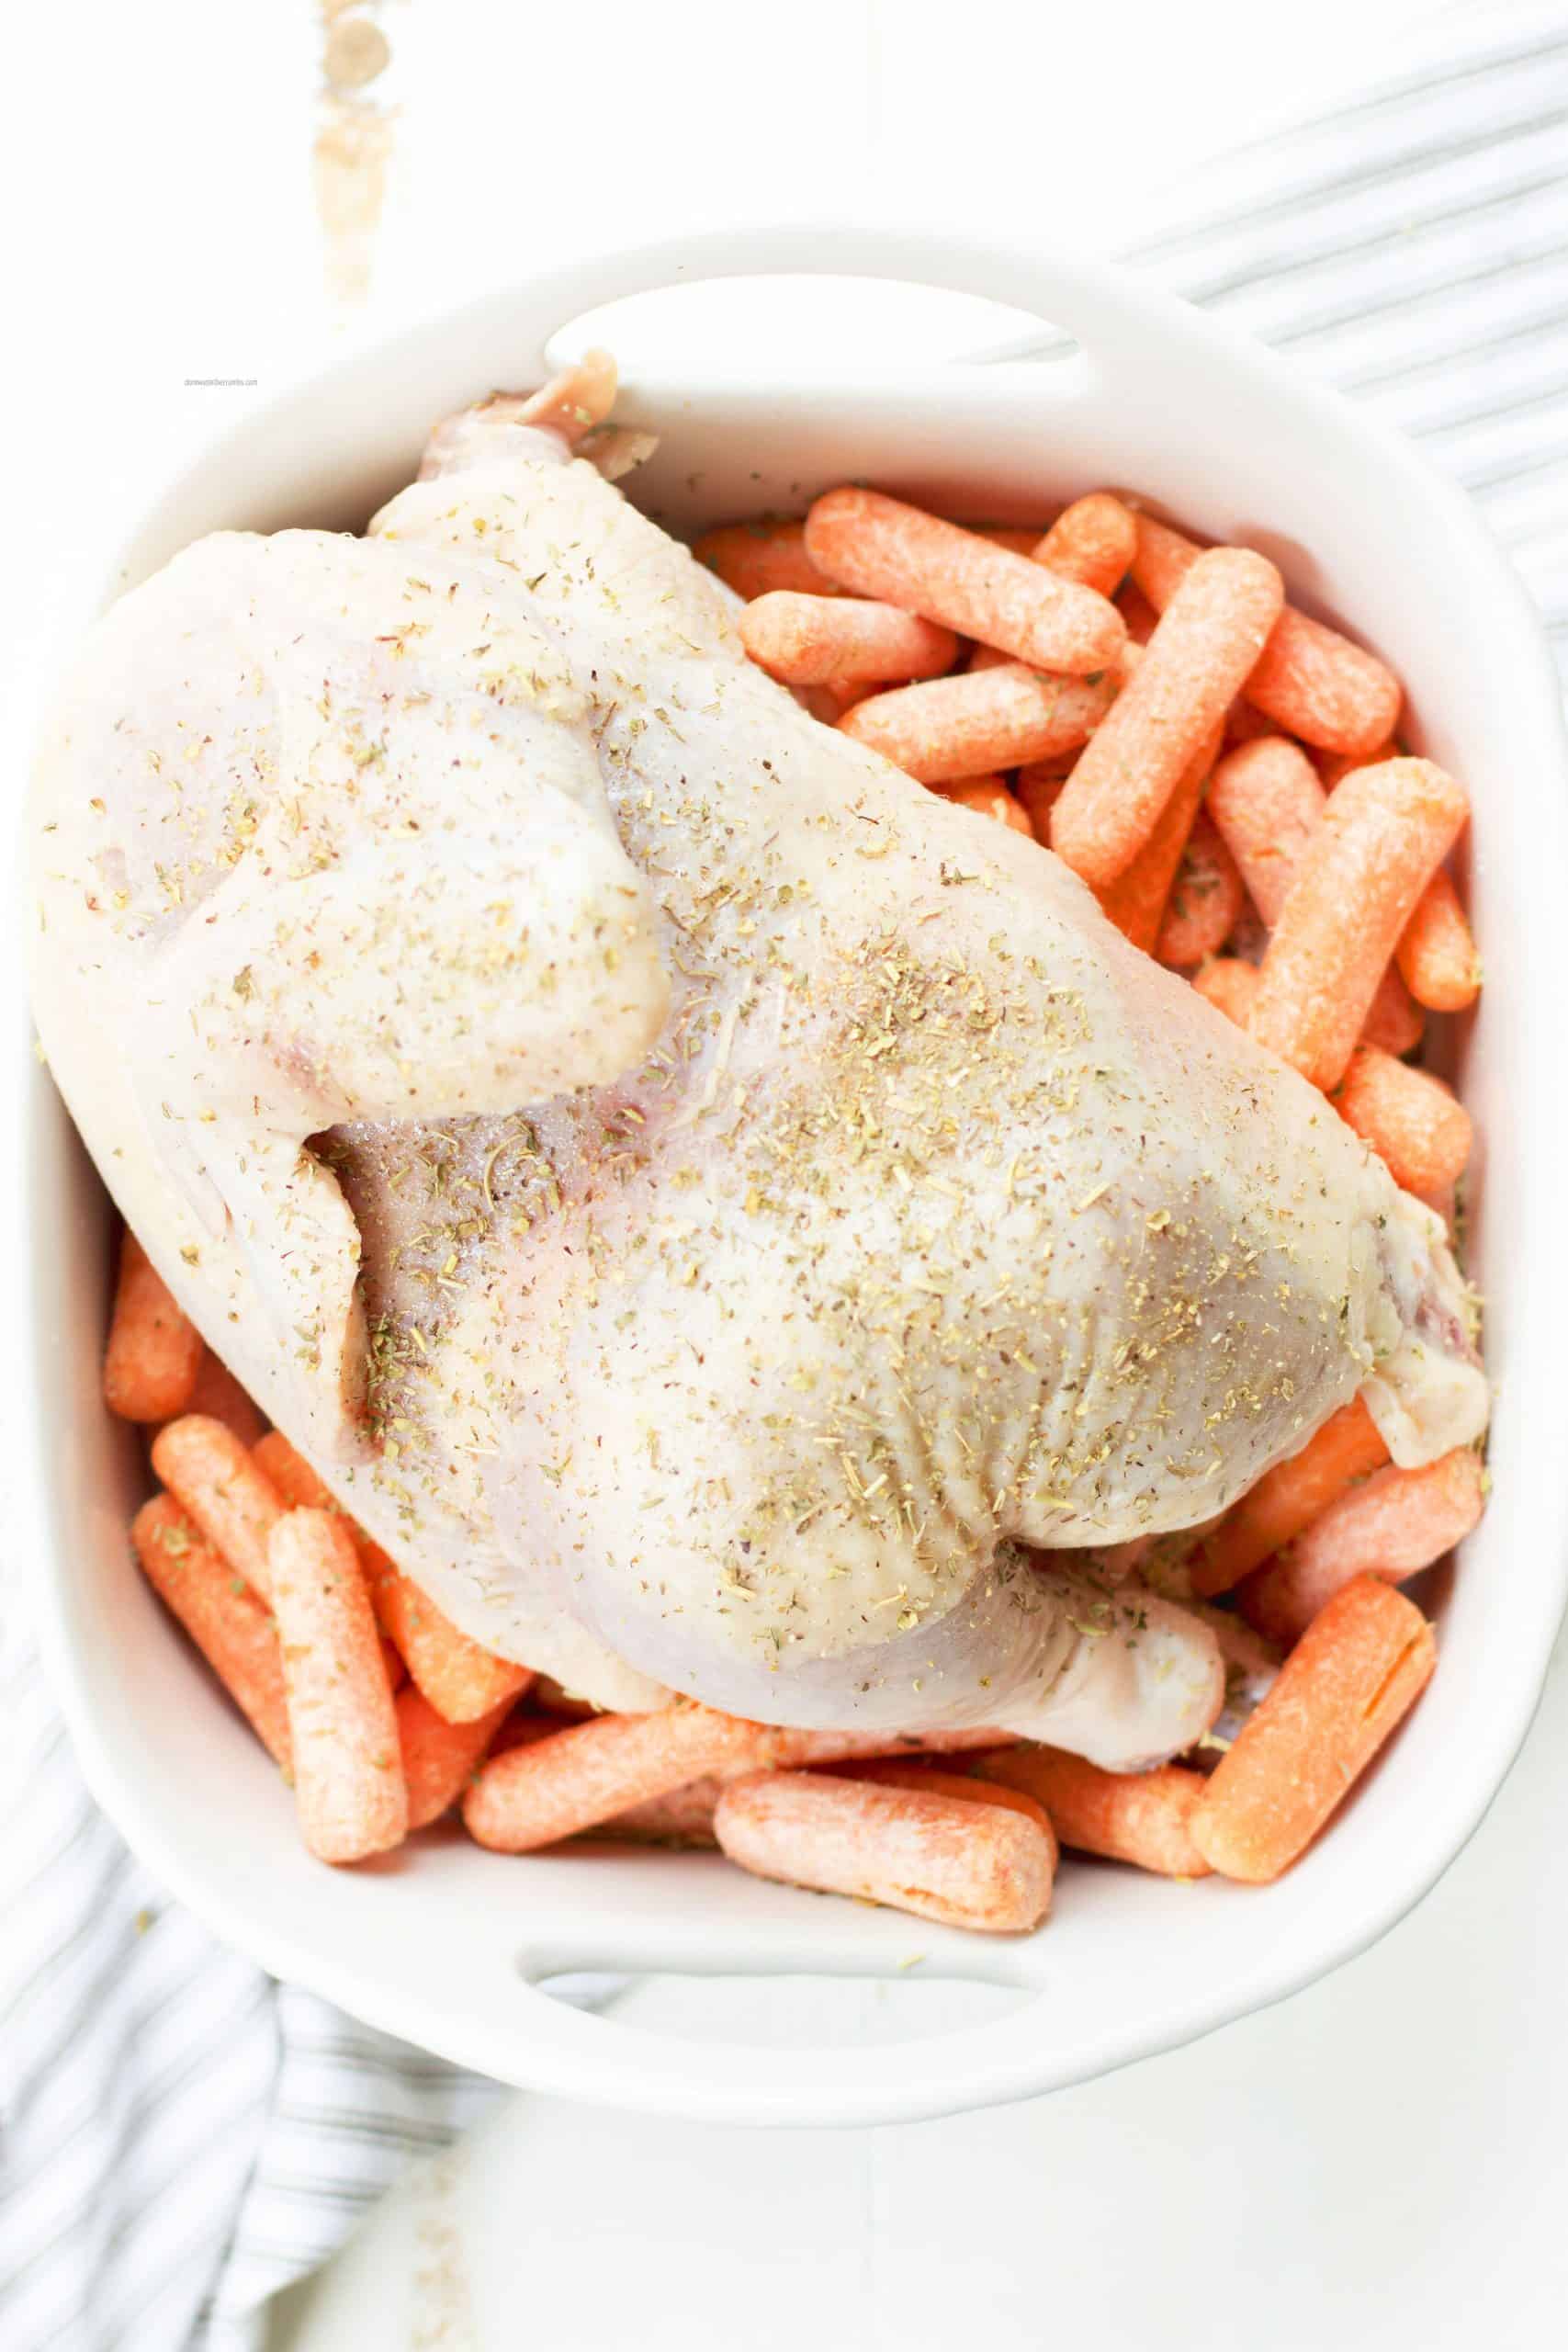 With such simple ingredients such as a whole chicken, butter and seasonings, the prep is so easy for this oven whole roasted chicken!